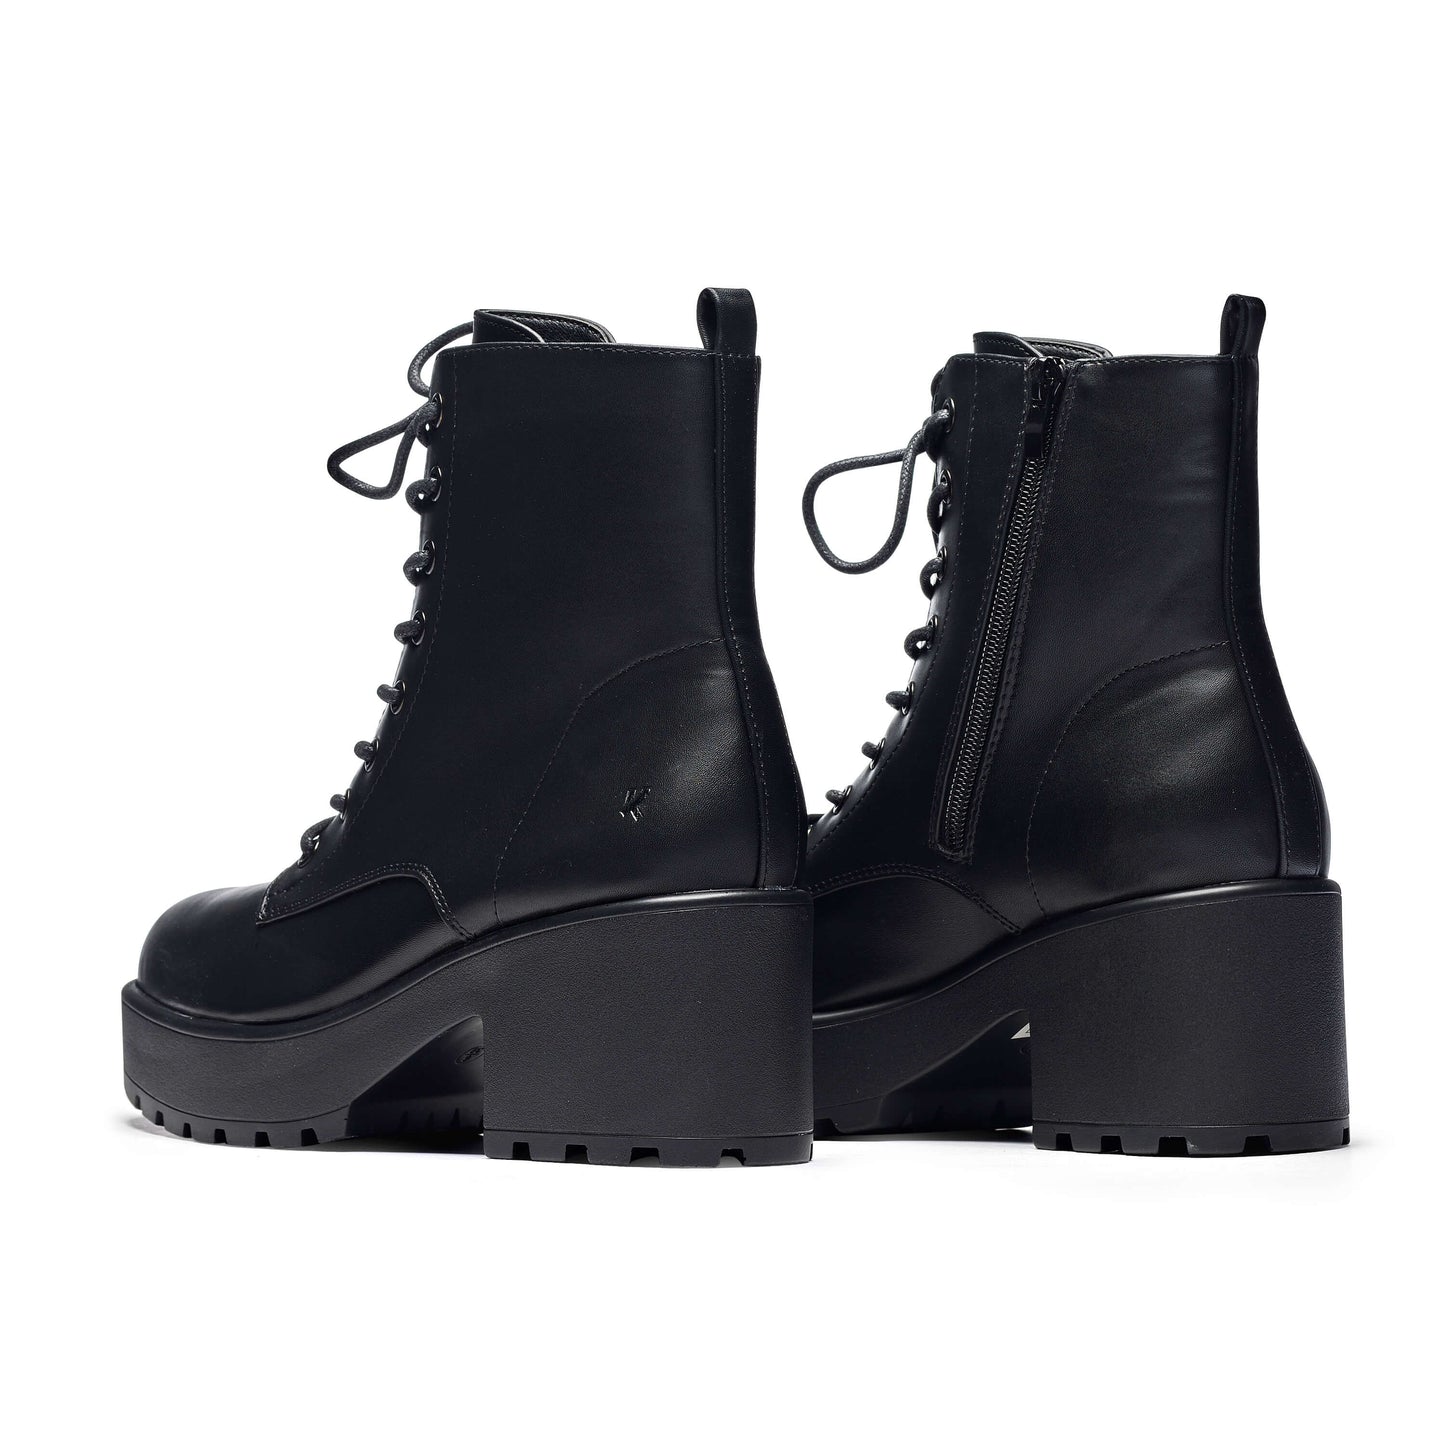 GIN Platform Military Boots - Ankle Boots - KOI Footwear - Black - Back View